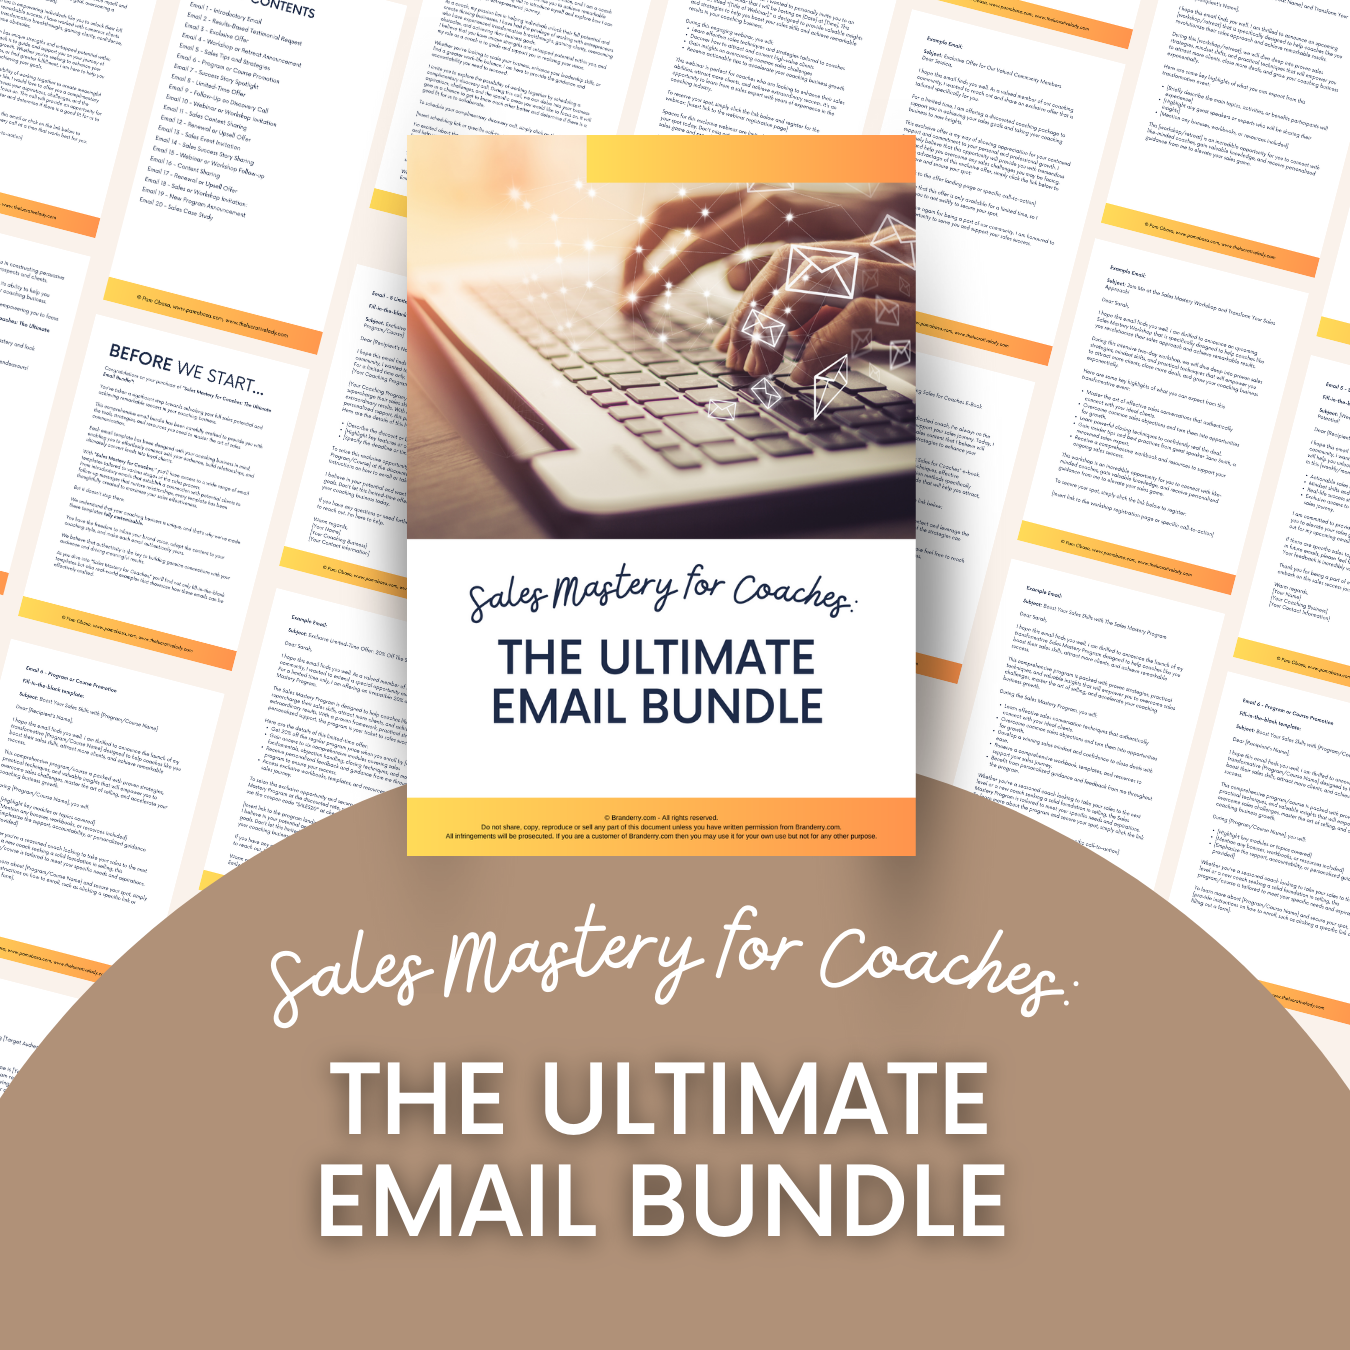 Sales Mastery for Coaches: The Ultimate Email Bundle